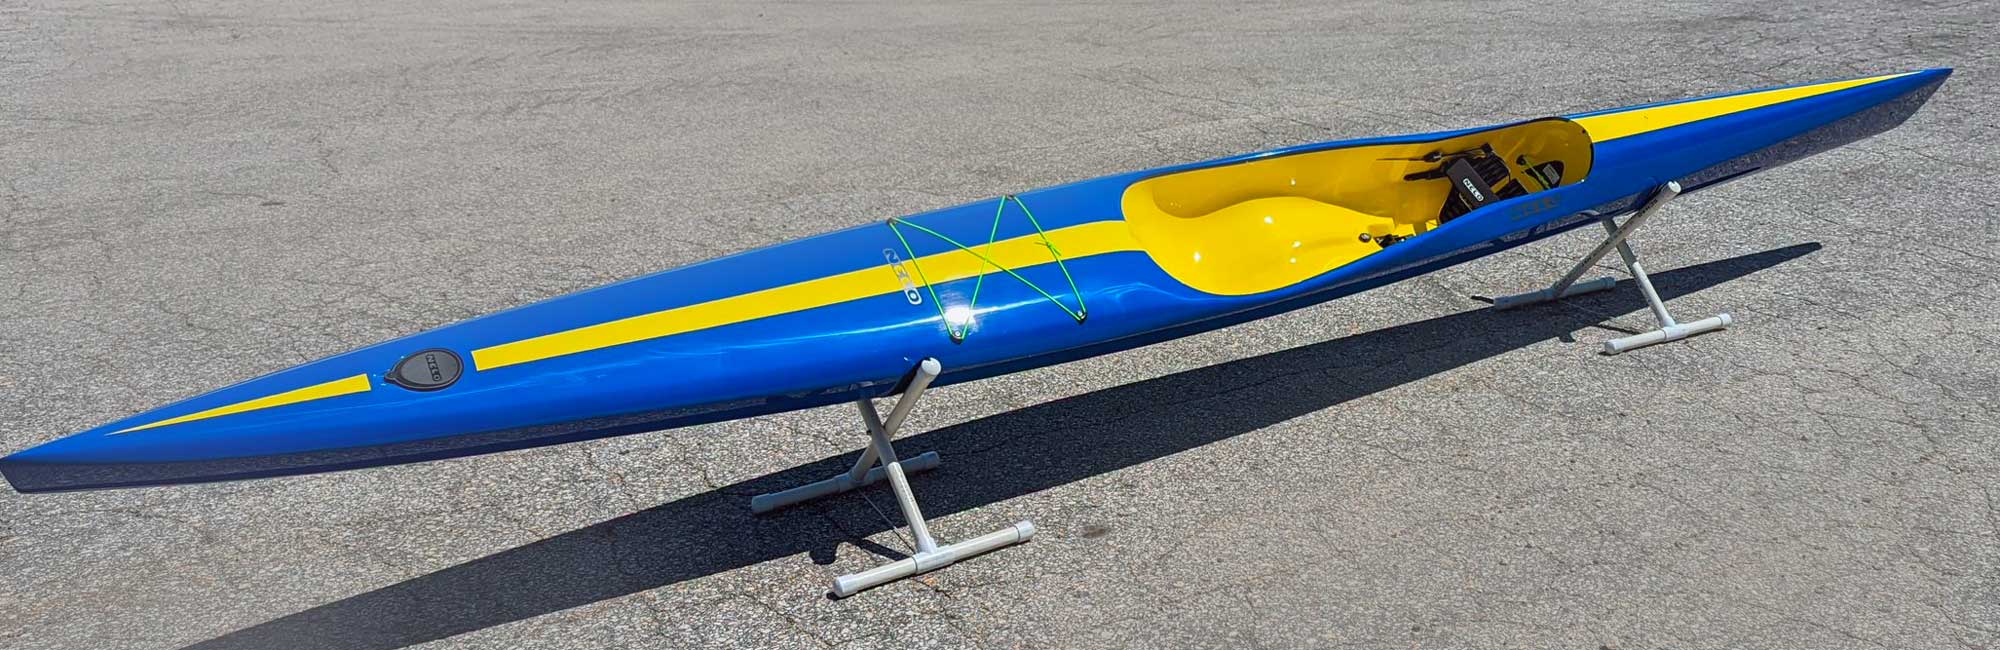 Nelo 540 for sale - prices and arrival date 